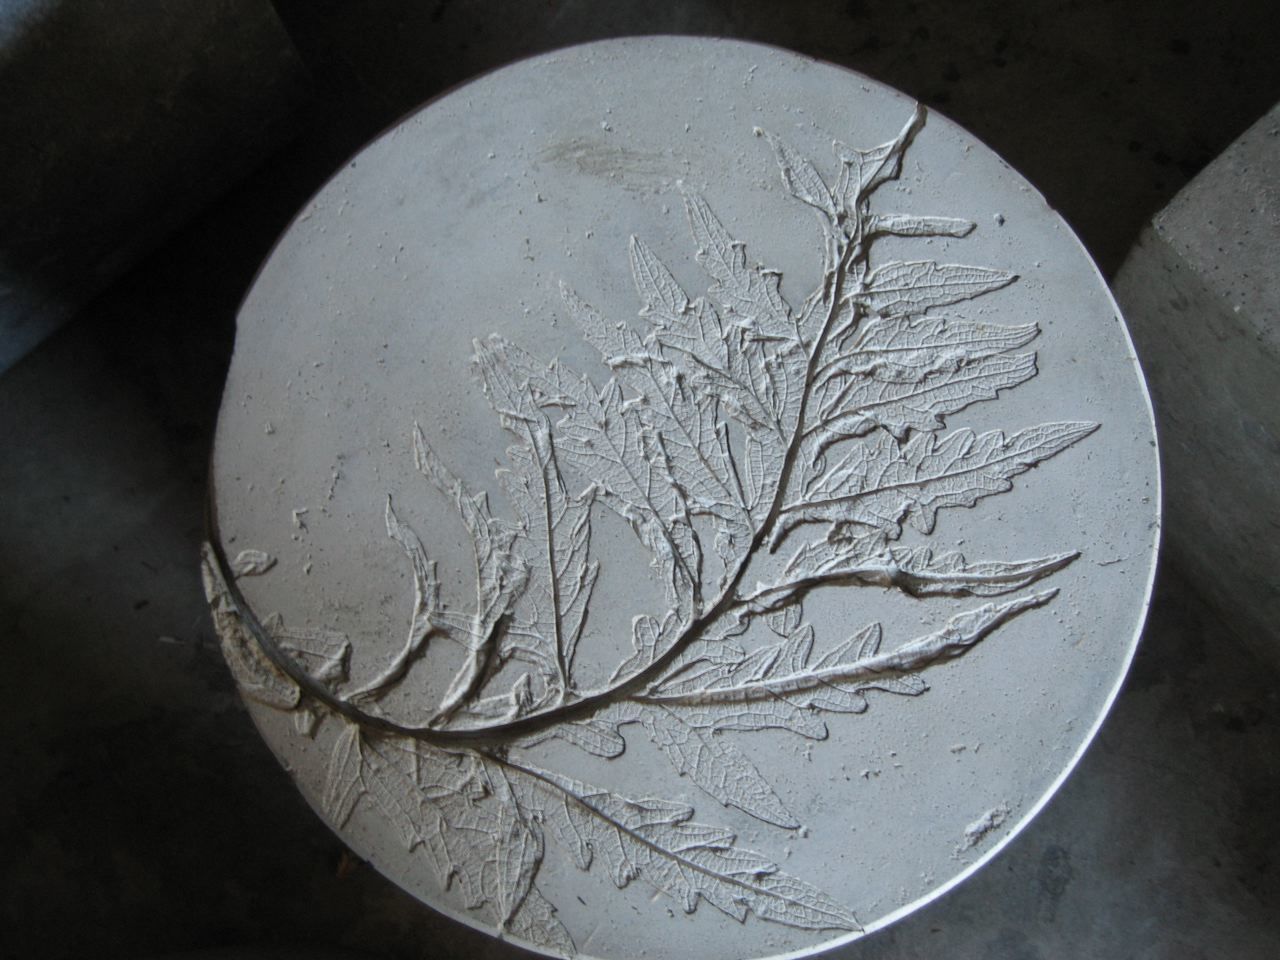 rustic fossil-like imprint of a curved artichoke leaf in round concrete accent table